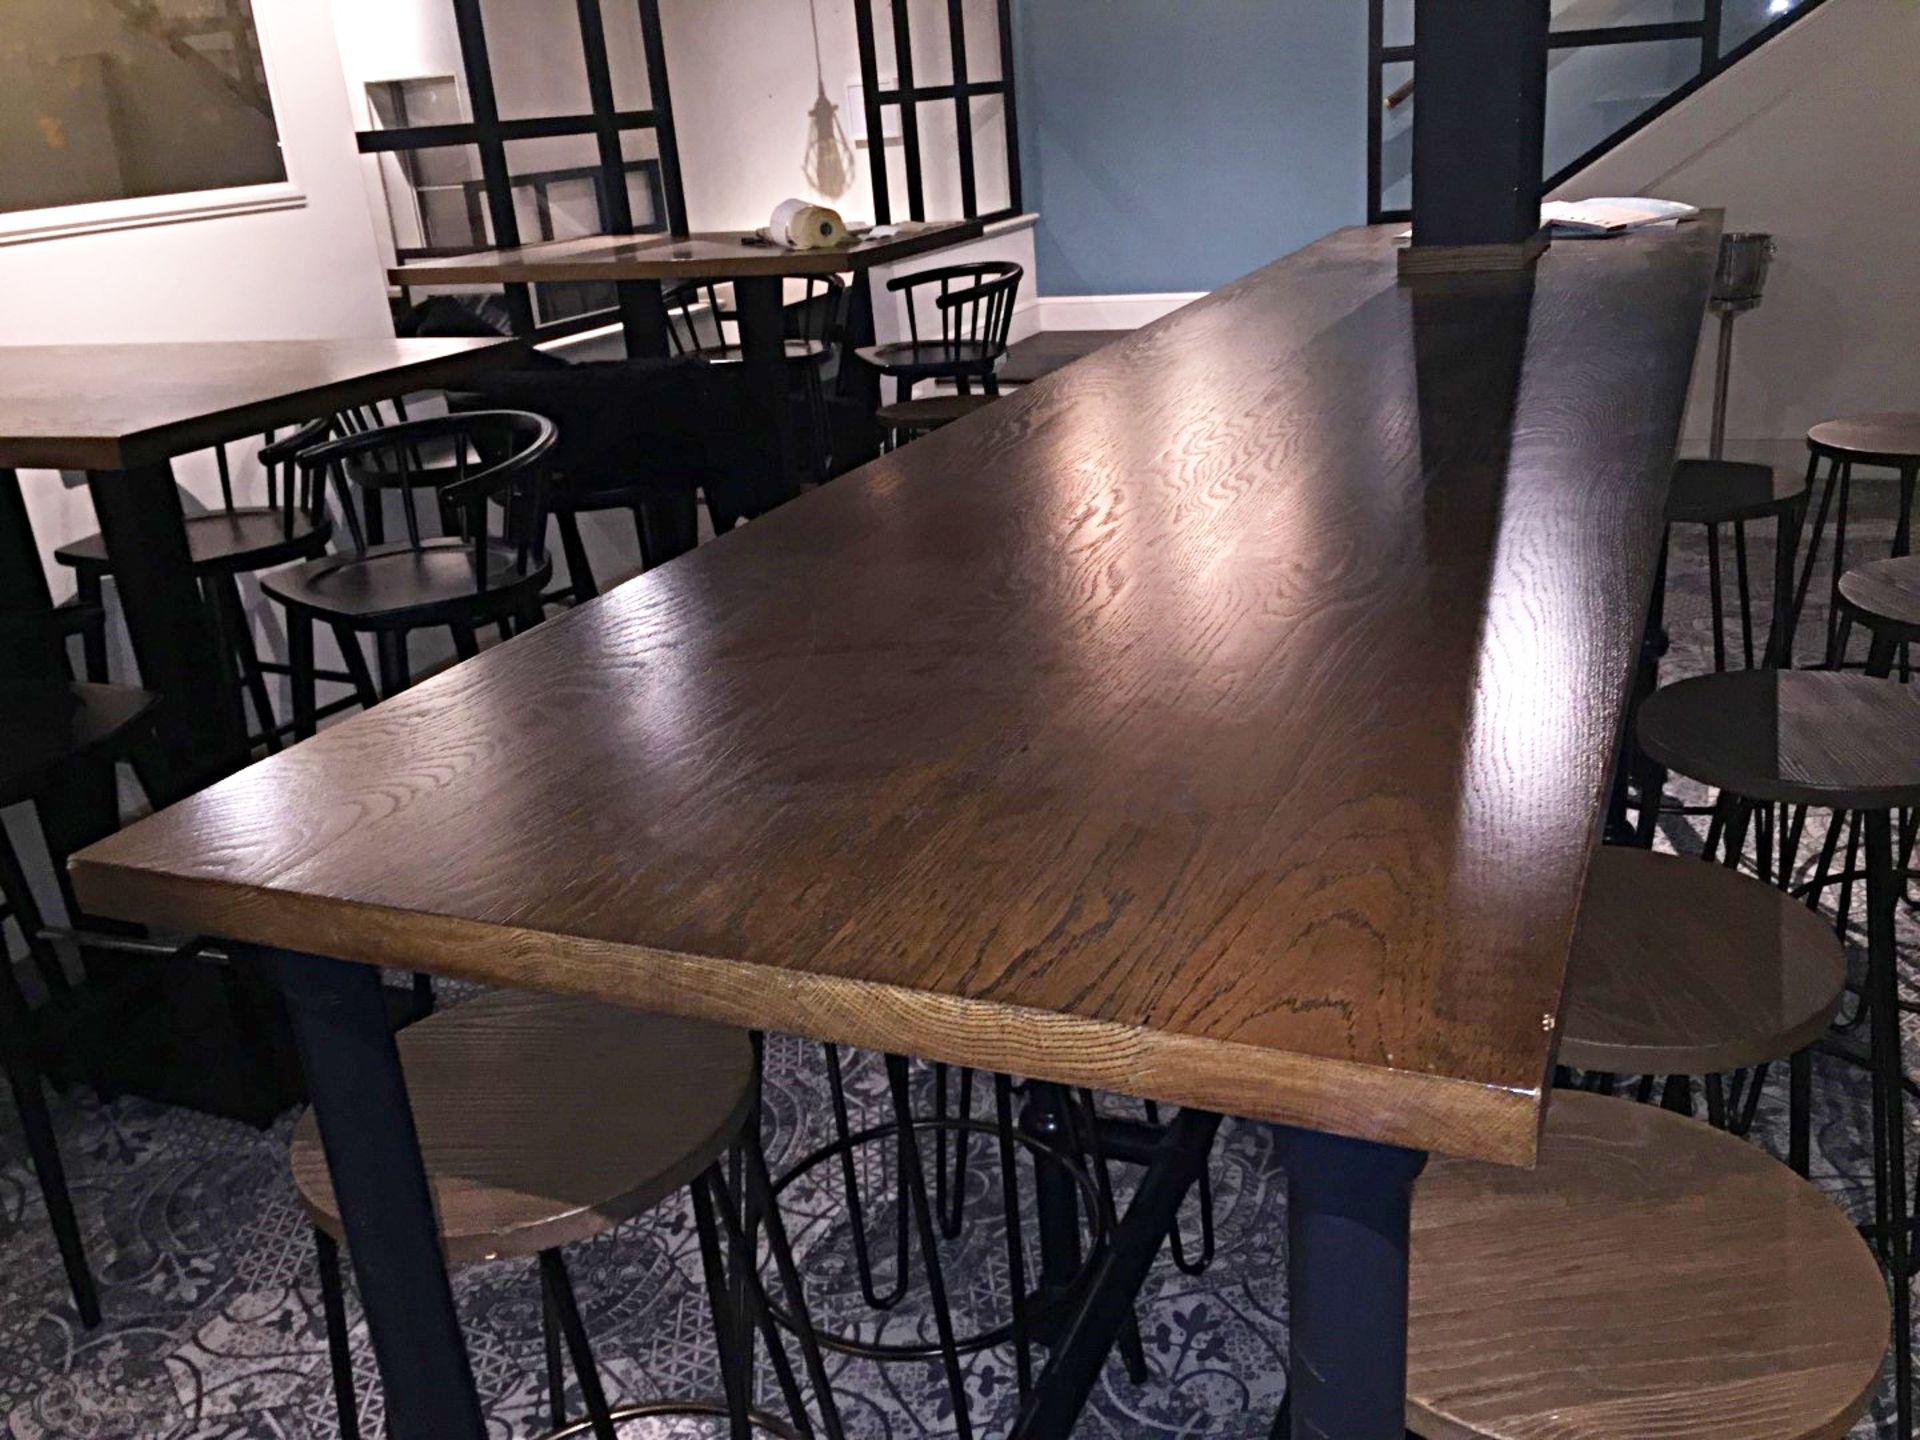 1 x 3-Metre Long Bar / Banquet Table - Impressive Piece Featuring A Thick Solid Wood Top And Sturdy - Image 8 of 9